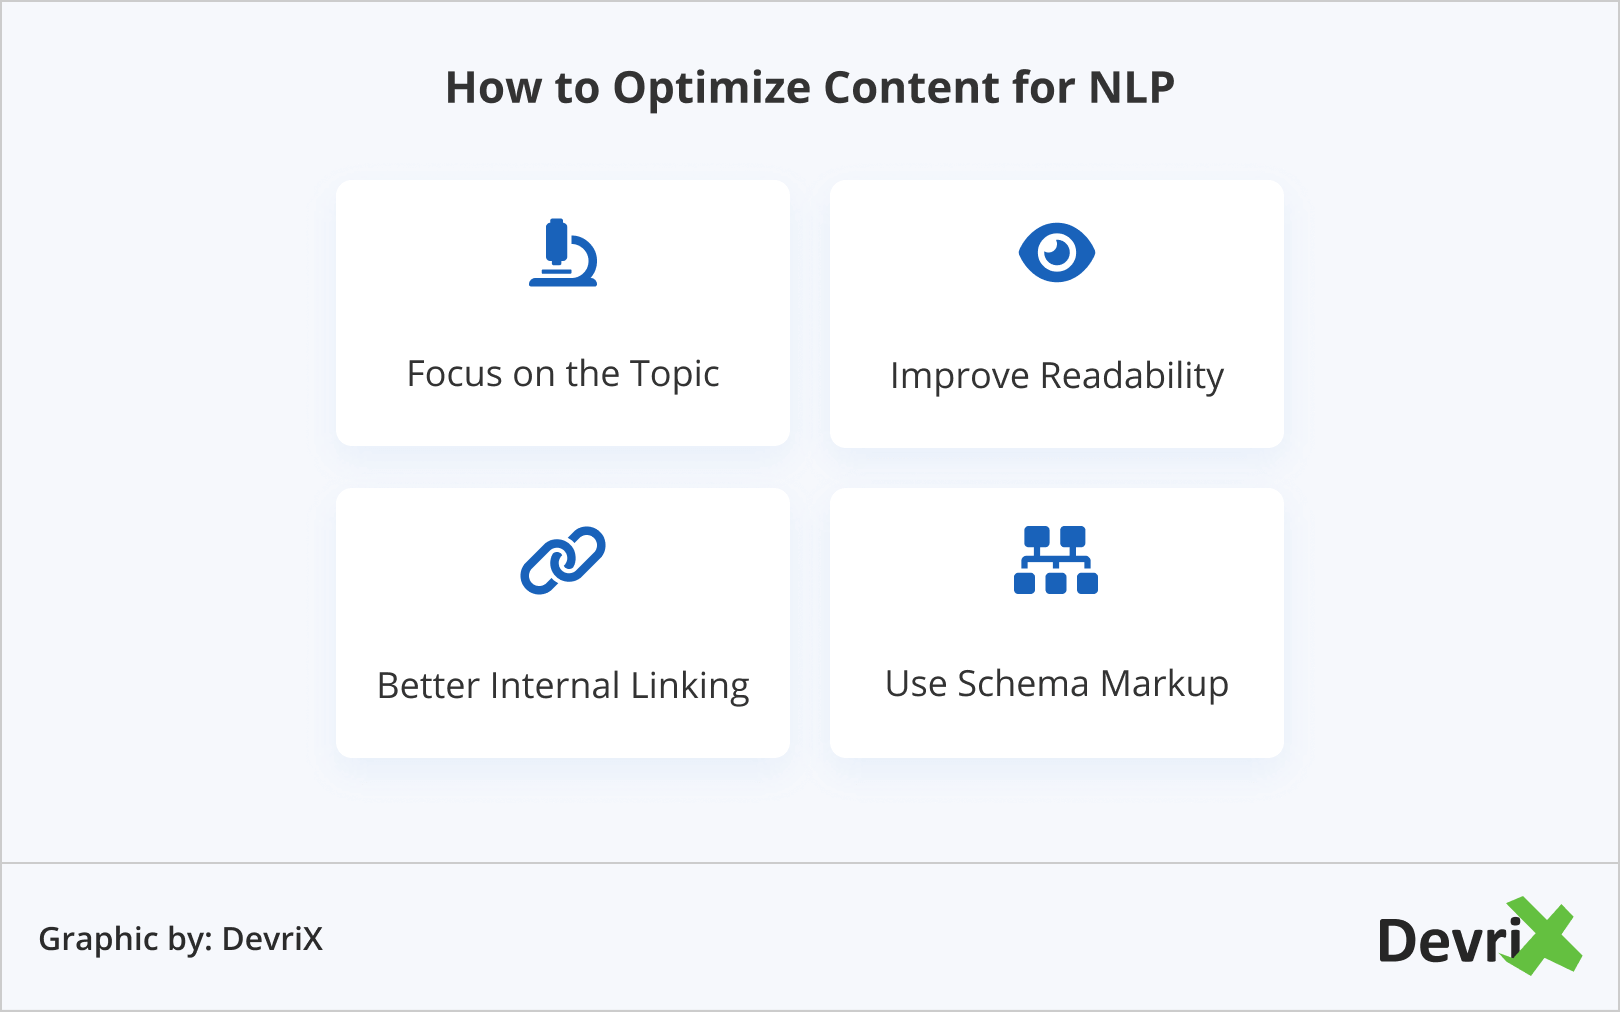 How to Optimize Content for NLP